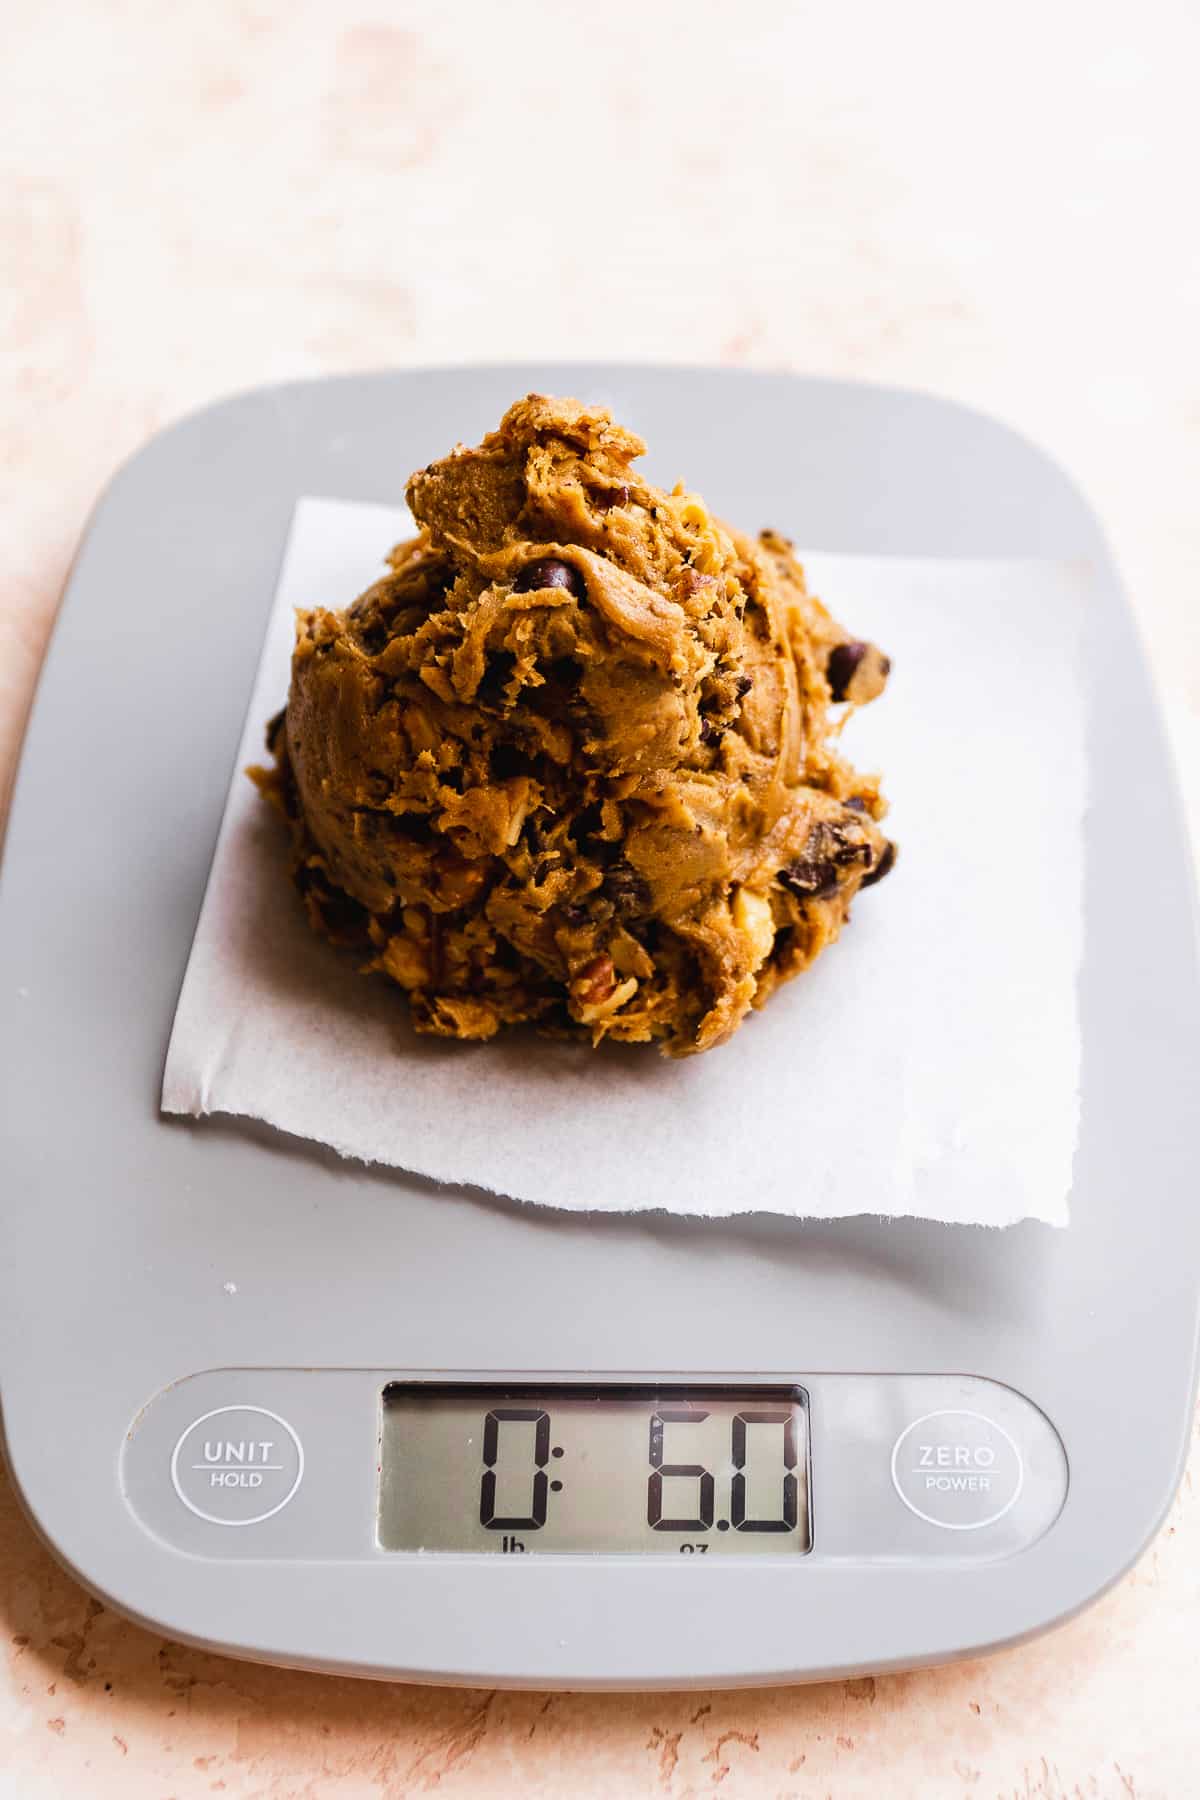 Cookie dough being weighed on a kitchen scale.